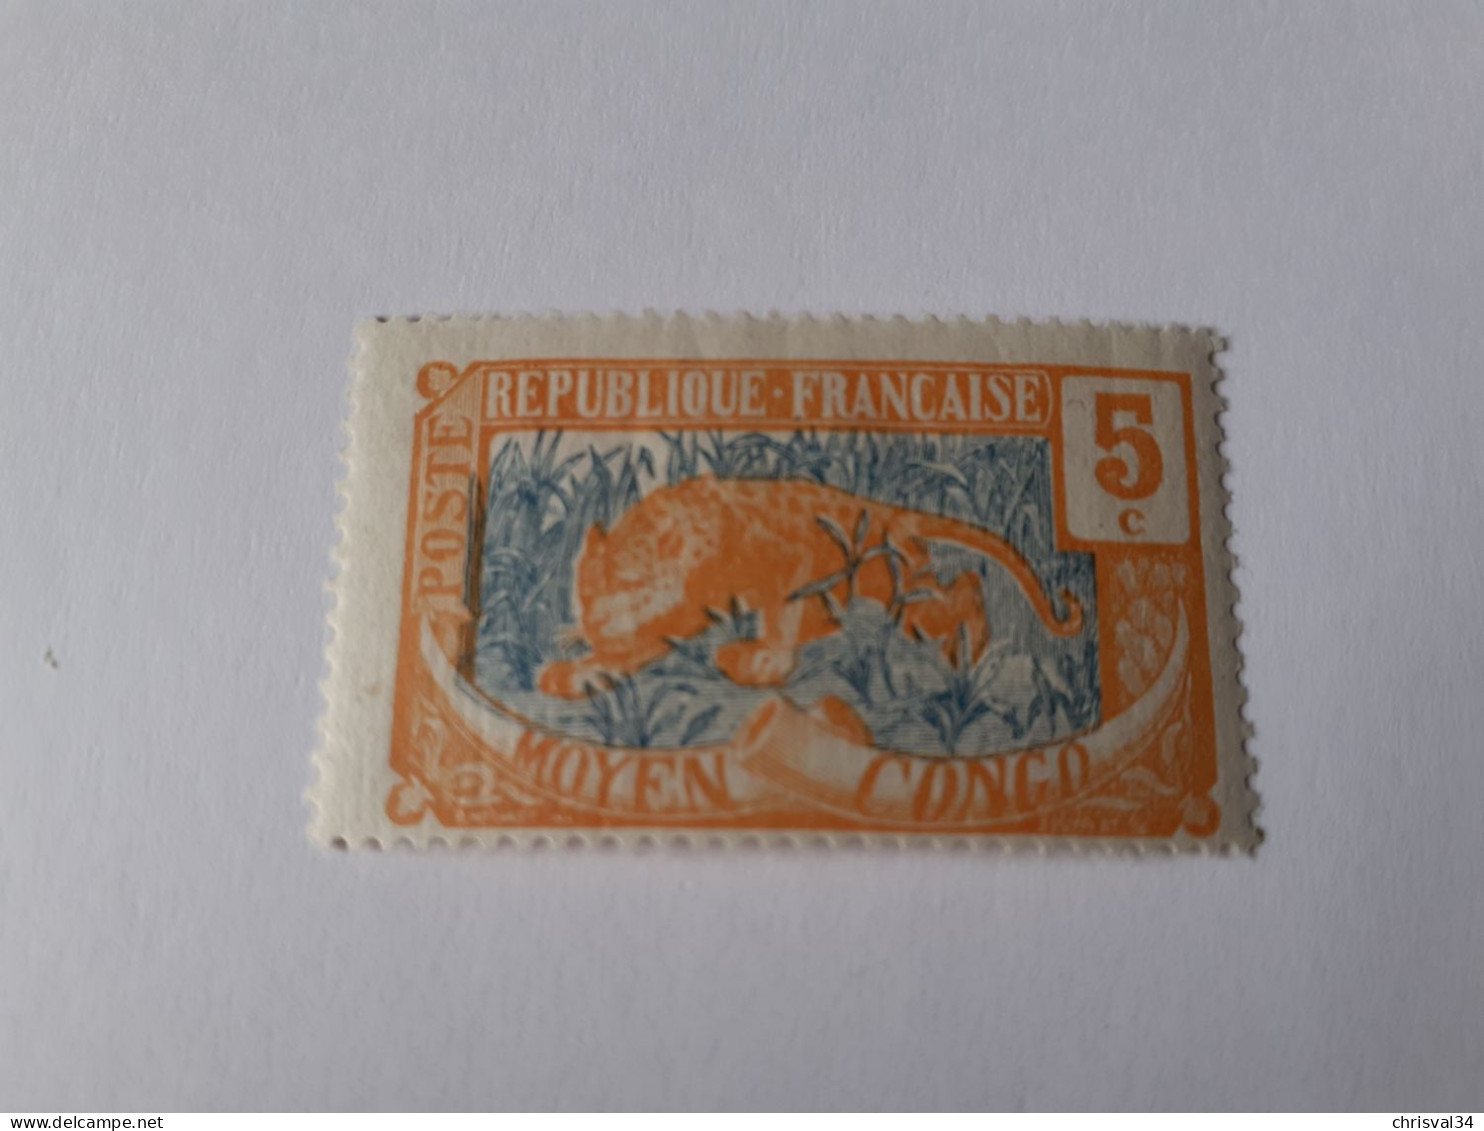 TIMBRE  CONGO    N  67     COTE  1,50  EUROS    NEUF  TRACE  CHARNIERE - Neufs